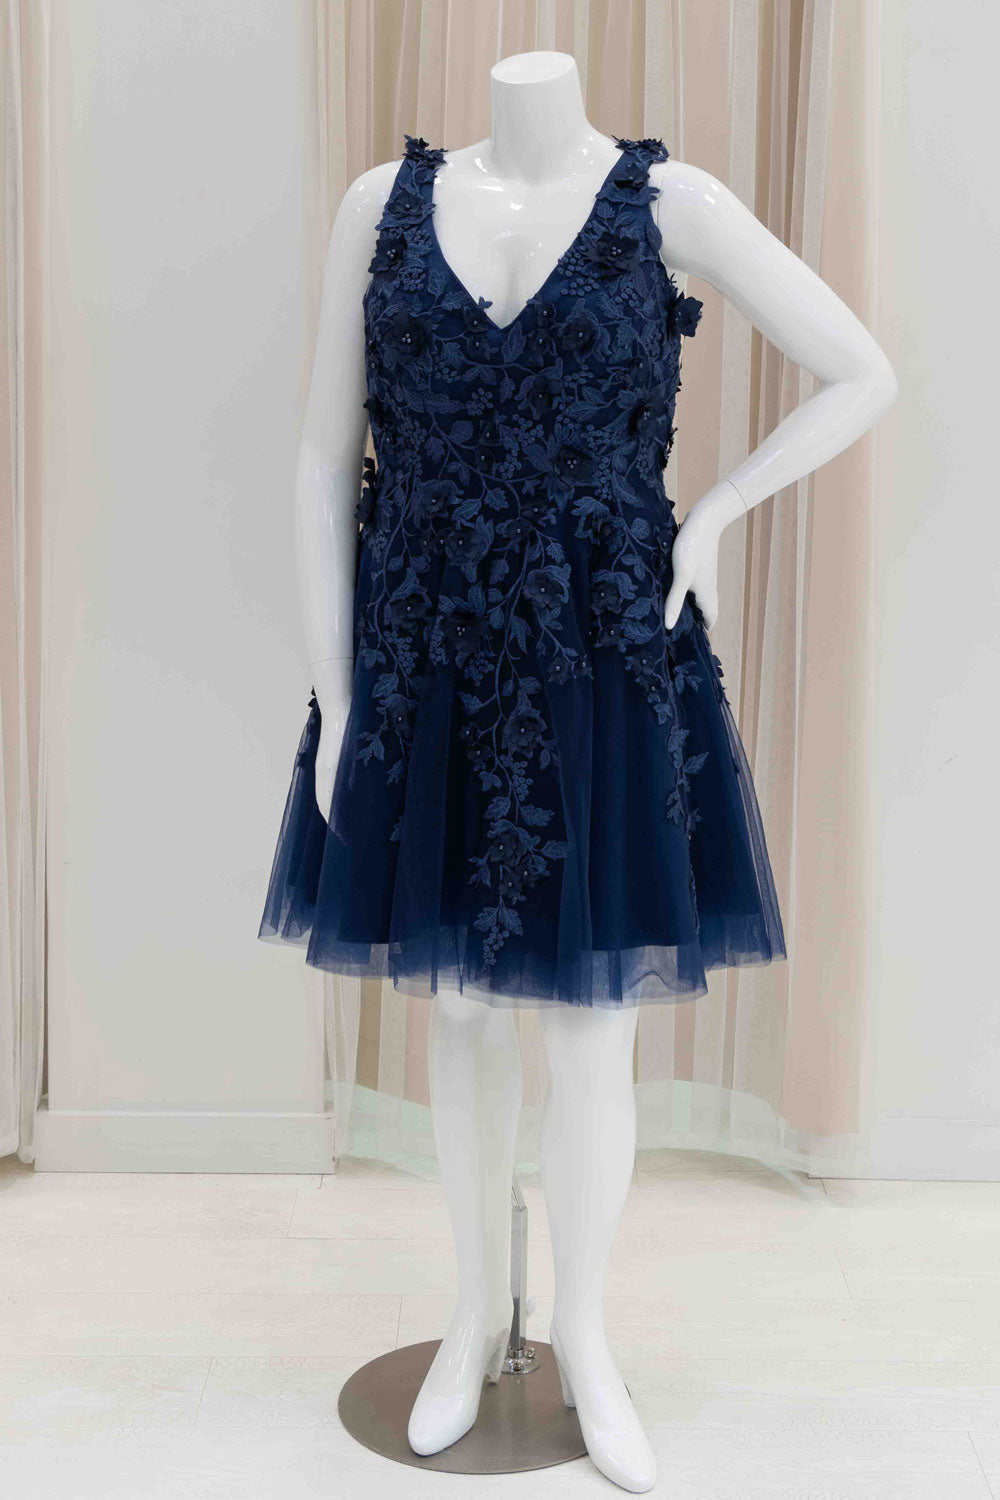 3D Flowers V-Neck Short Fit and Flare Dress in Navy Blue